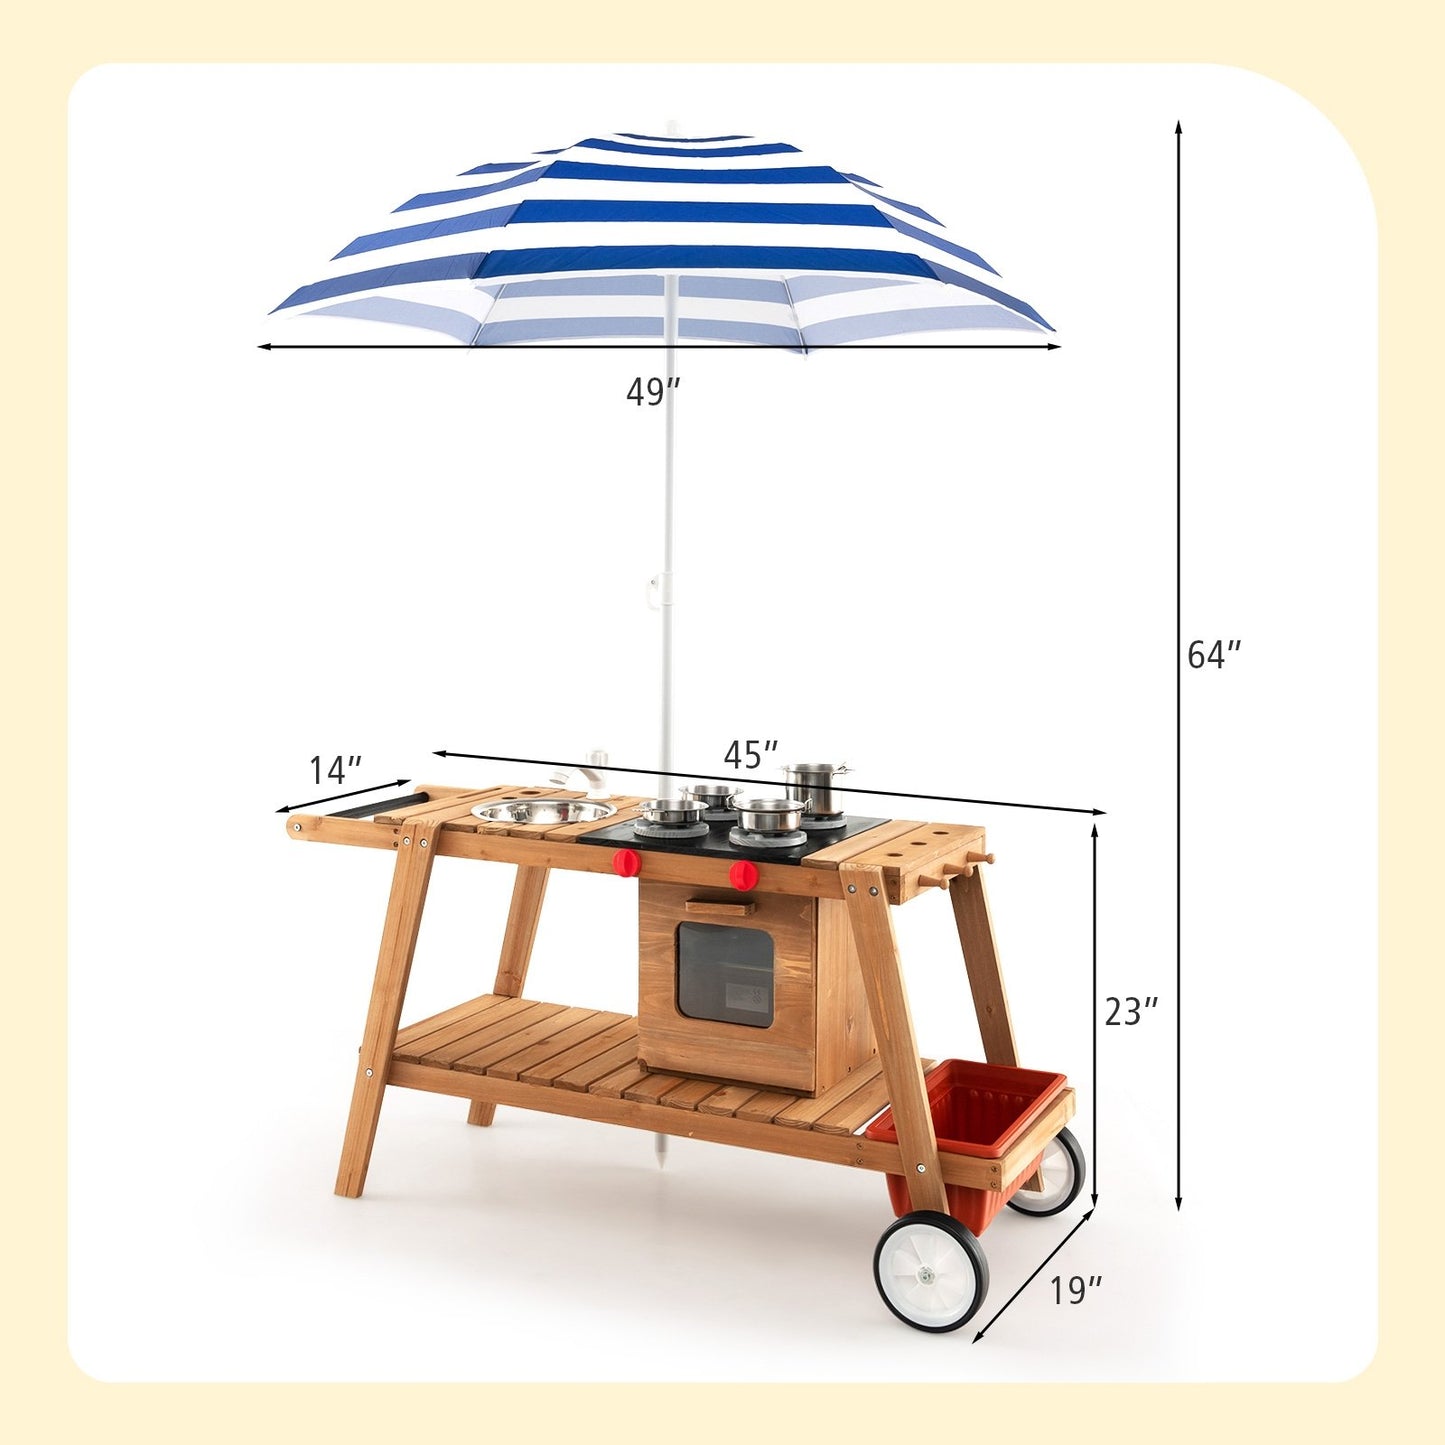 Wooden Play Cart with Sun Proof Umbrella for Toddlers Over 3 Years Old, Blue